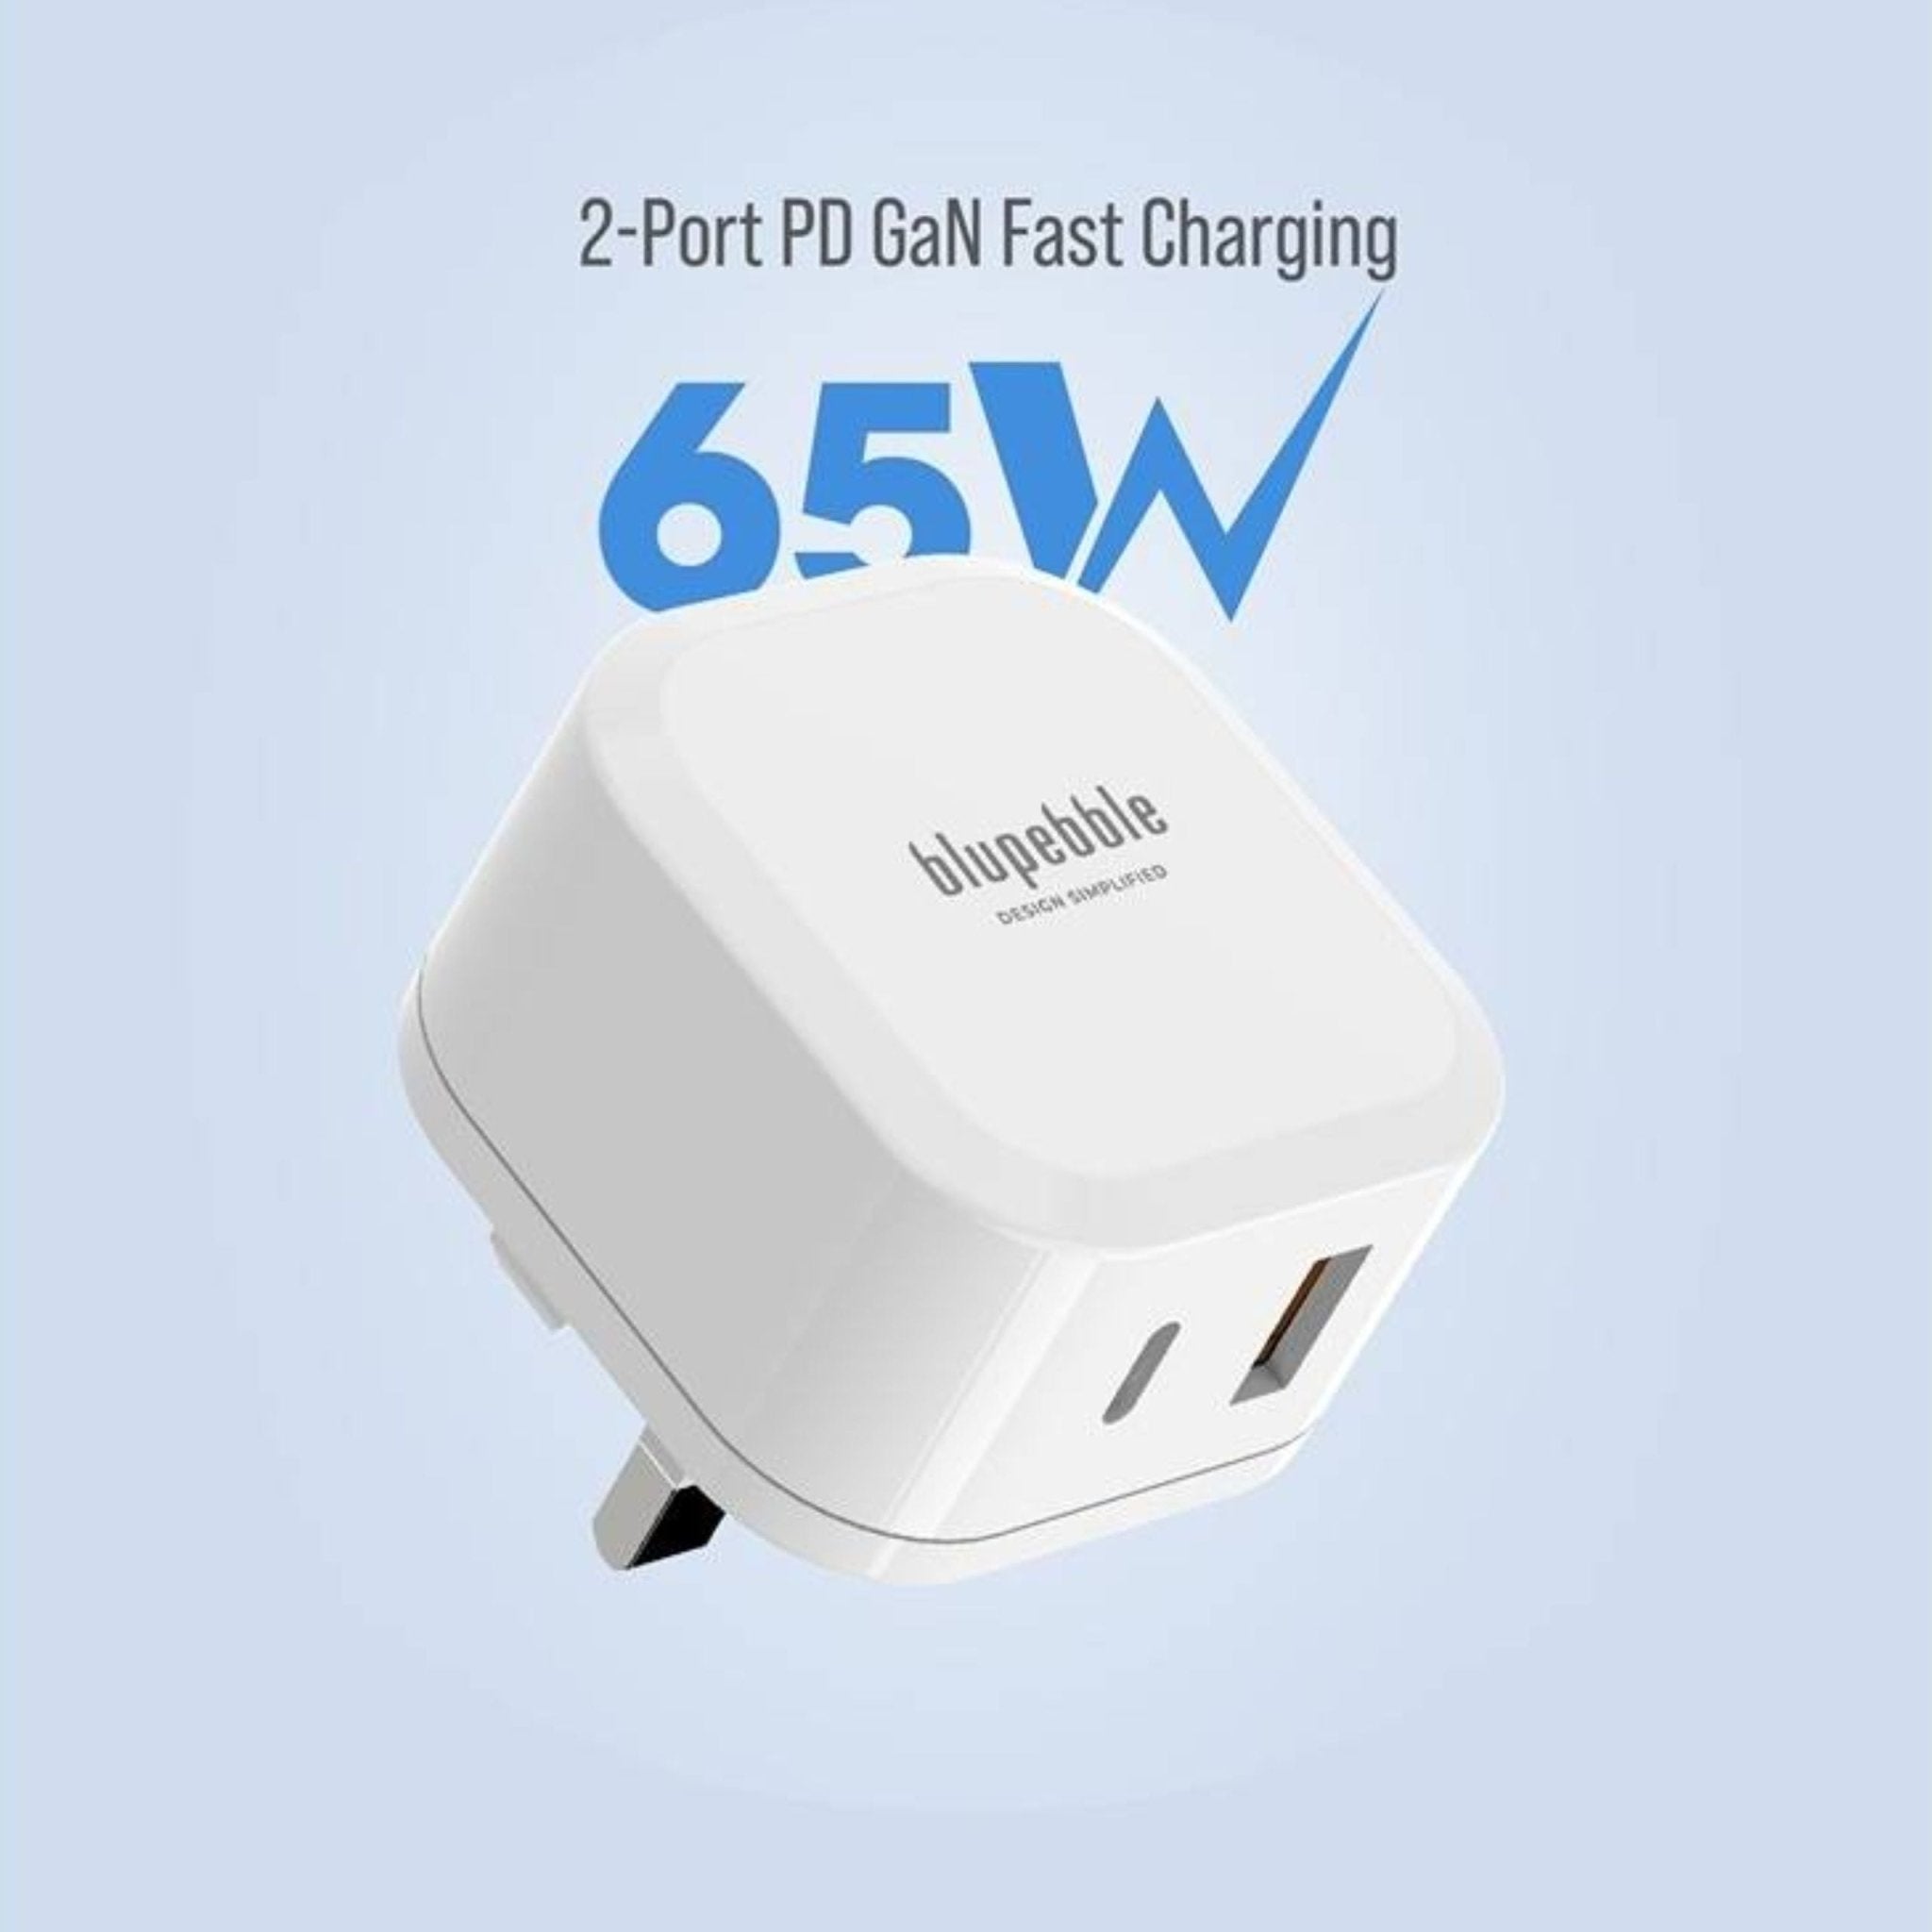 Blupebble 2-Port PD Gan Fast Charger 65W - White